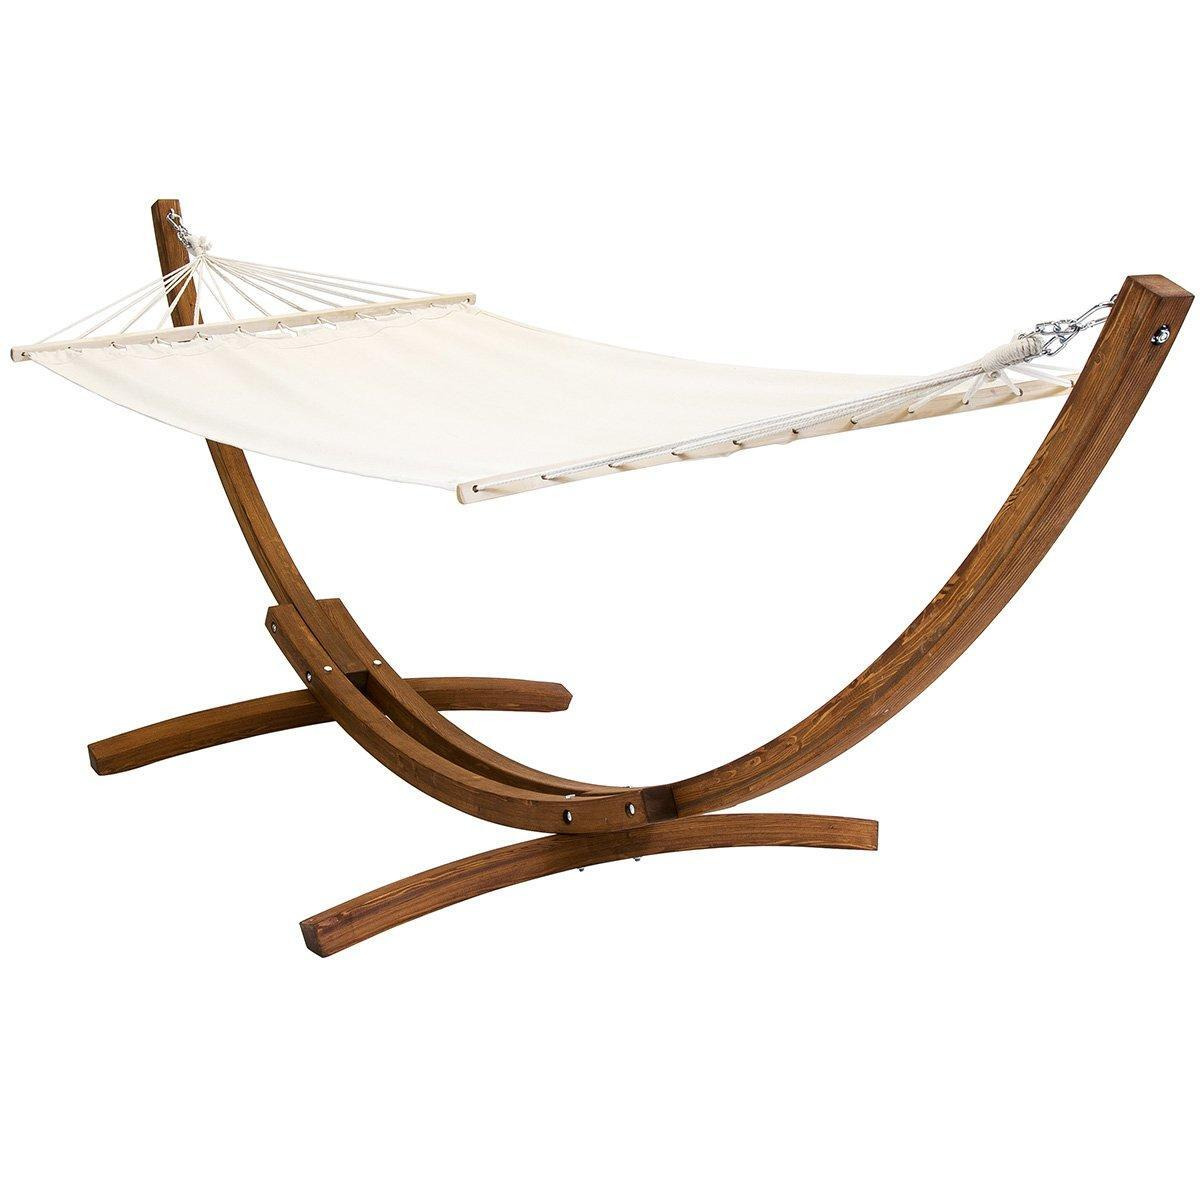 3M Garden Hammock With Wooden Arc Stand One Person - Cream - image 1